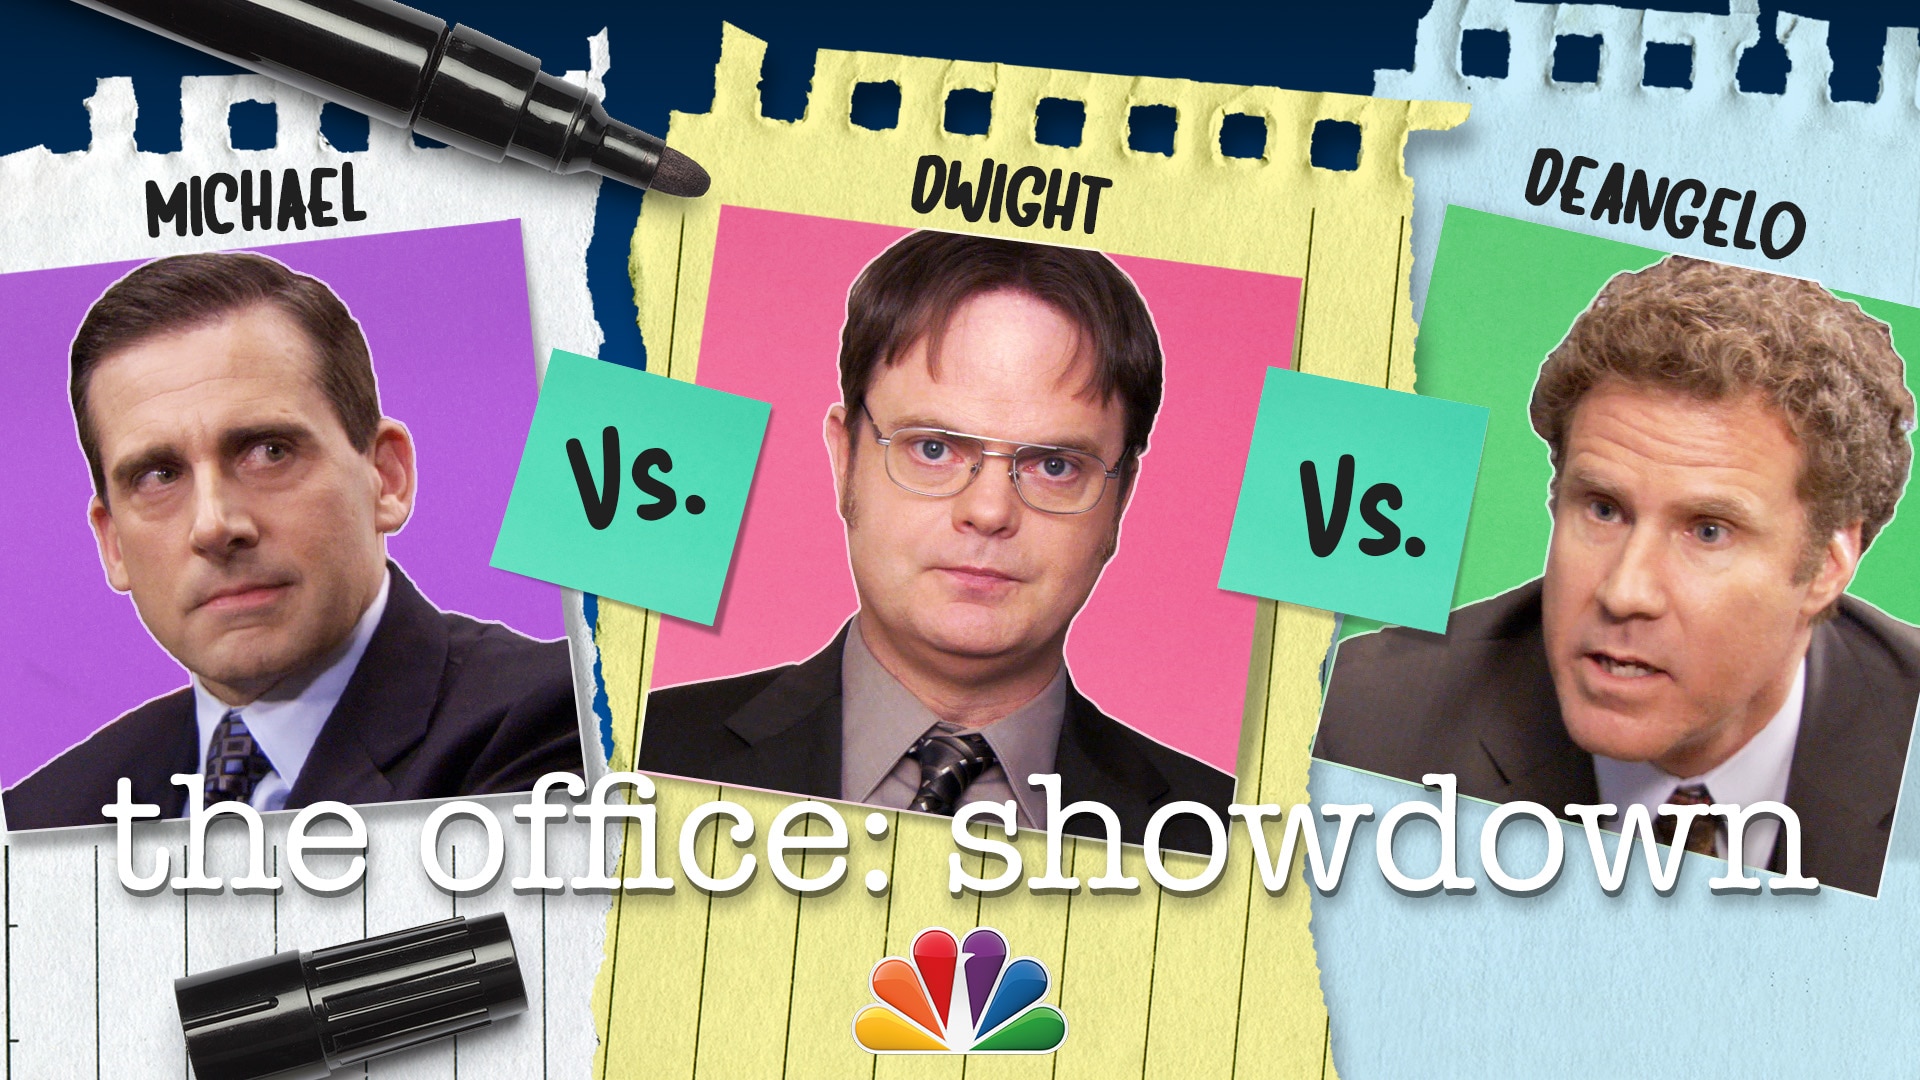 Dwight vs. the Computer - The Office 